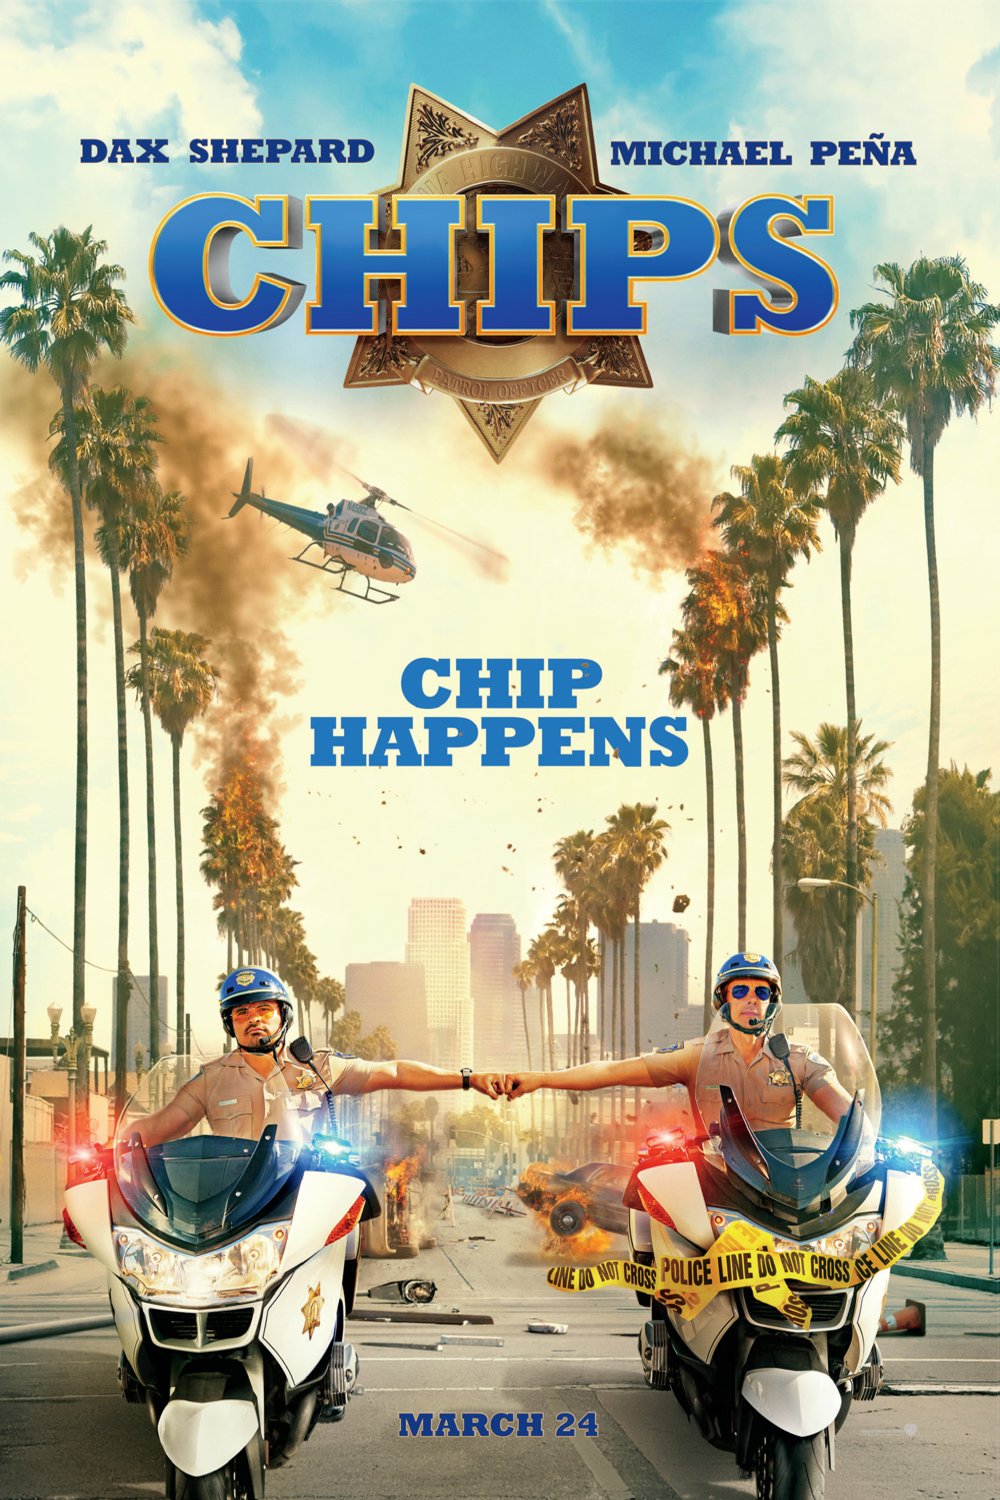 Poster of the movie CHiPs v.f.